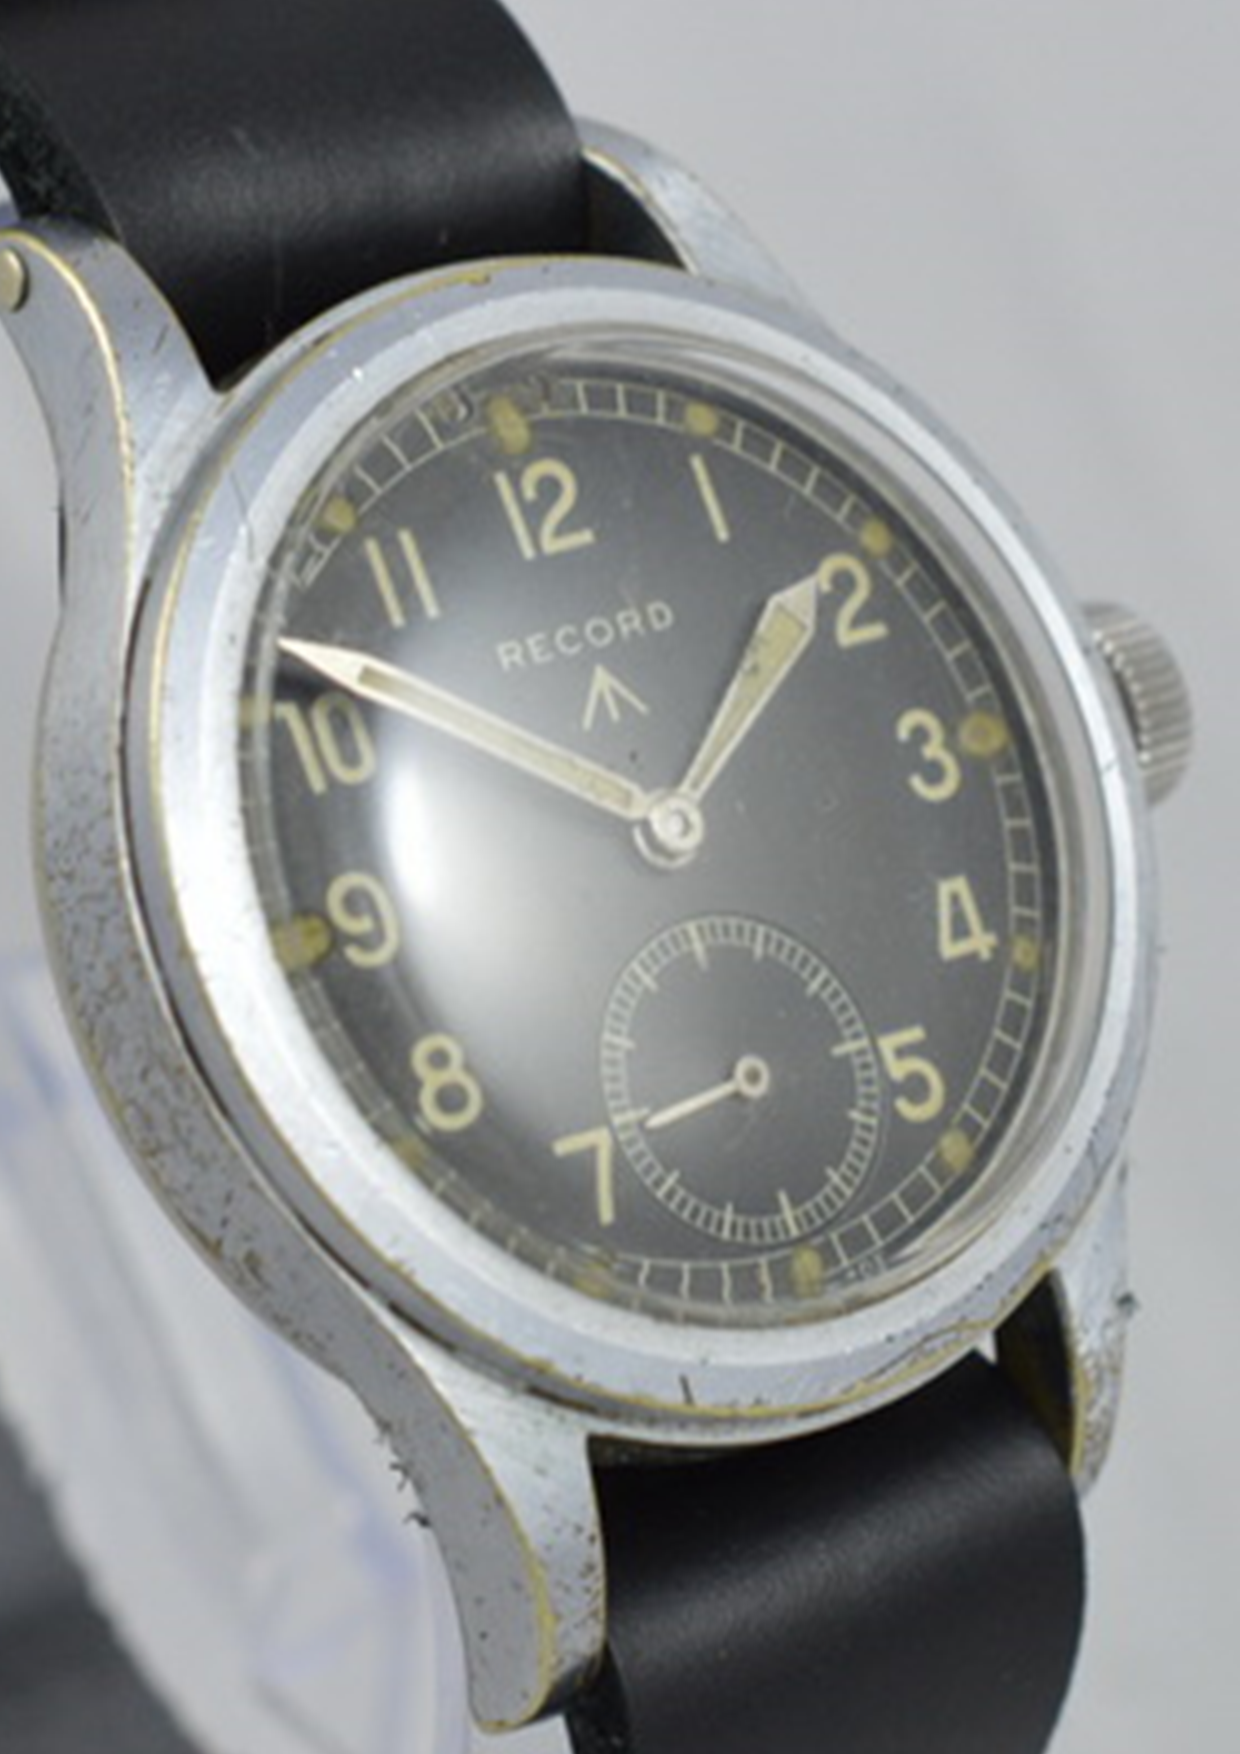 Military Watches by Kembery Antique Clocks Ltd